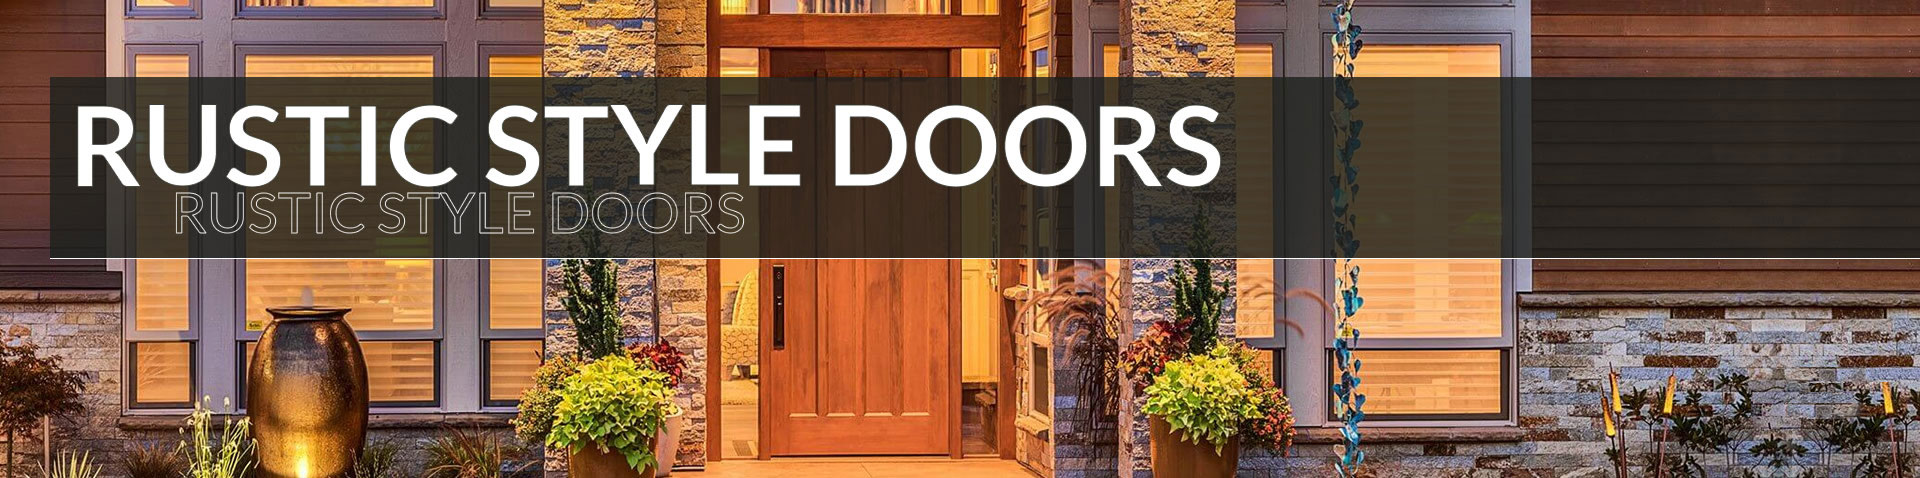 Rustic, Entry Doors from Turkstra - Visit our showroom in Stoney Creek today for information about our windows and doors, Quality installation with professional estimates.